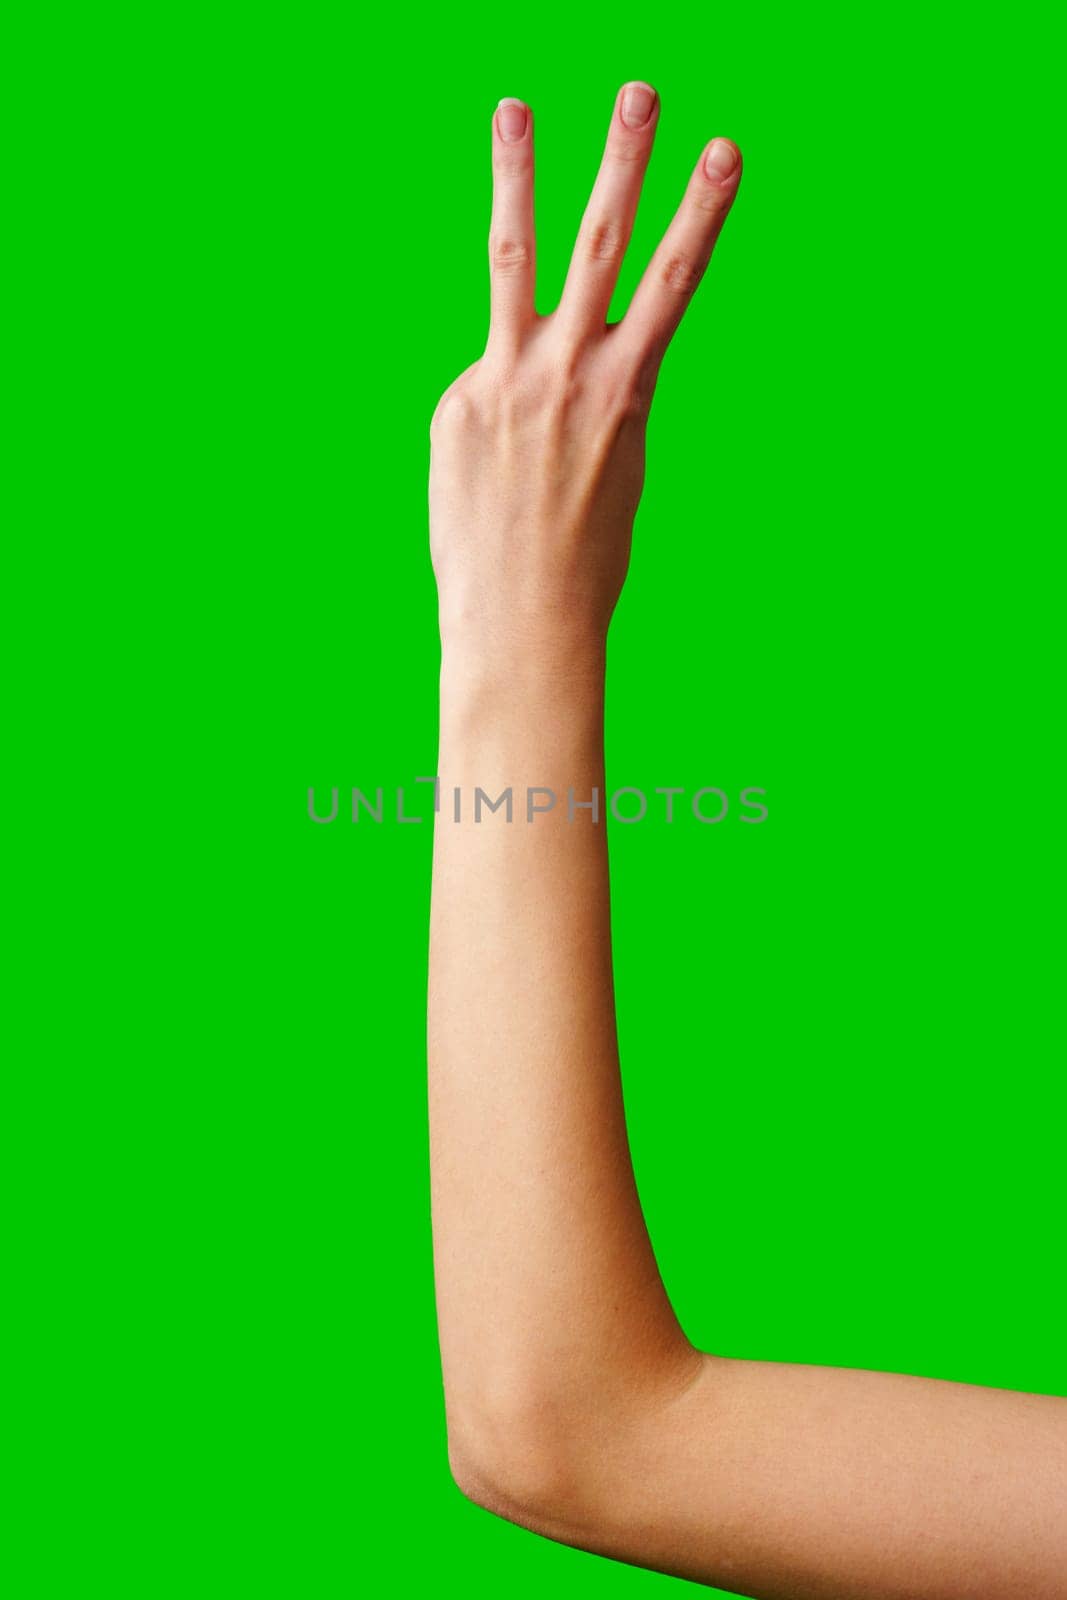 Human Hand Displaying the Number Three Against a Solid Green Background by Fabrikasimf